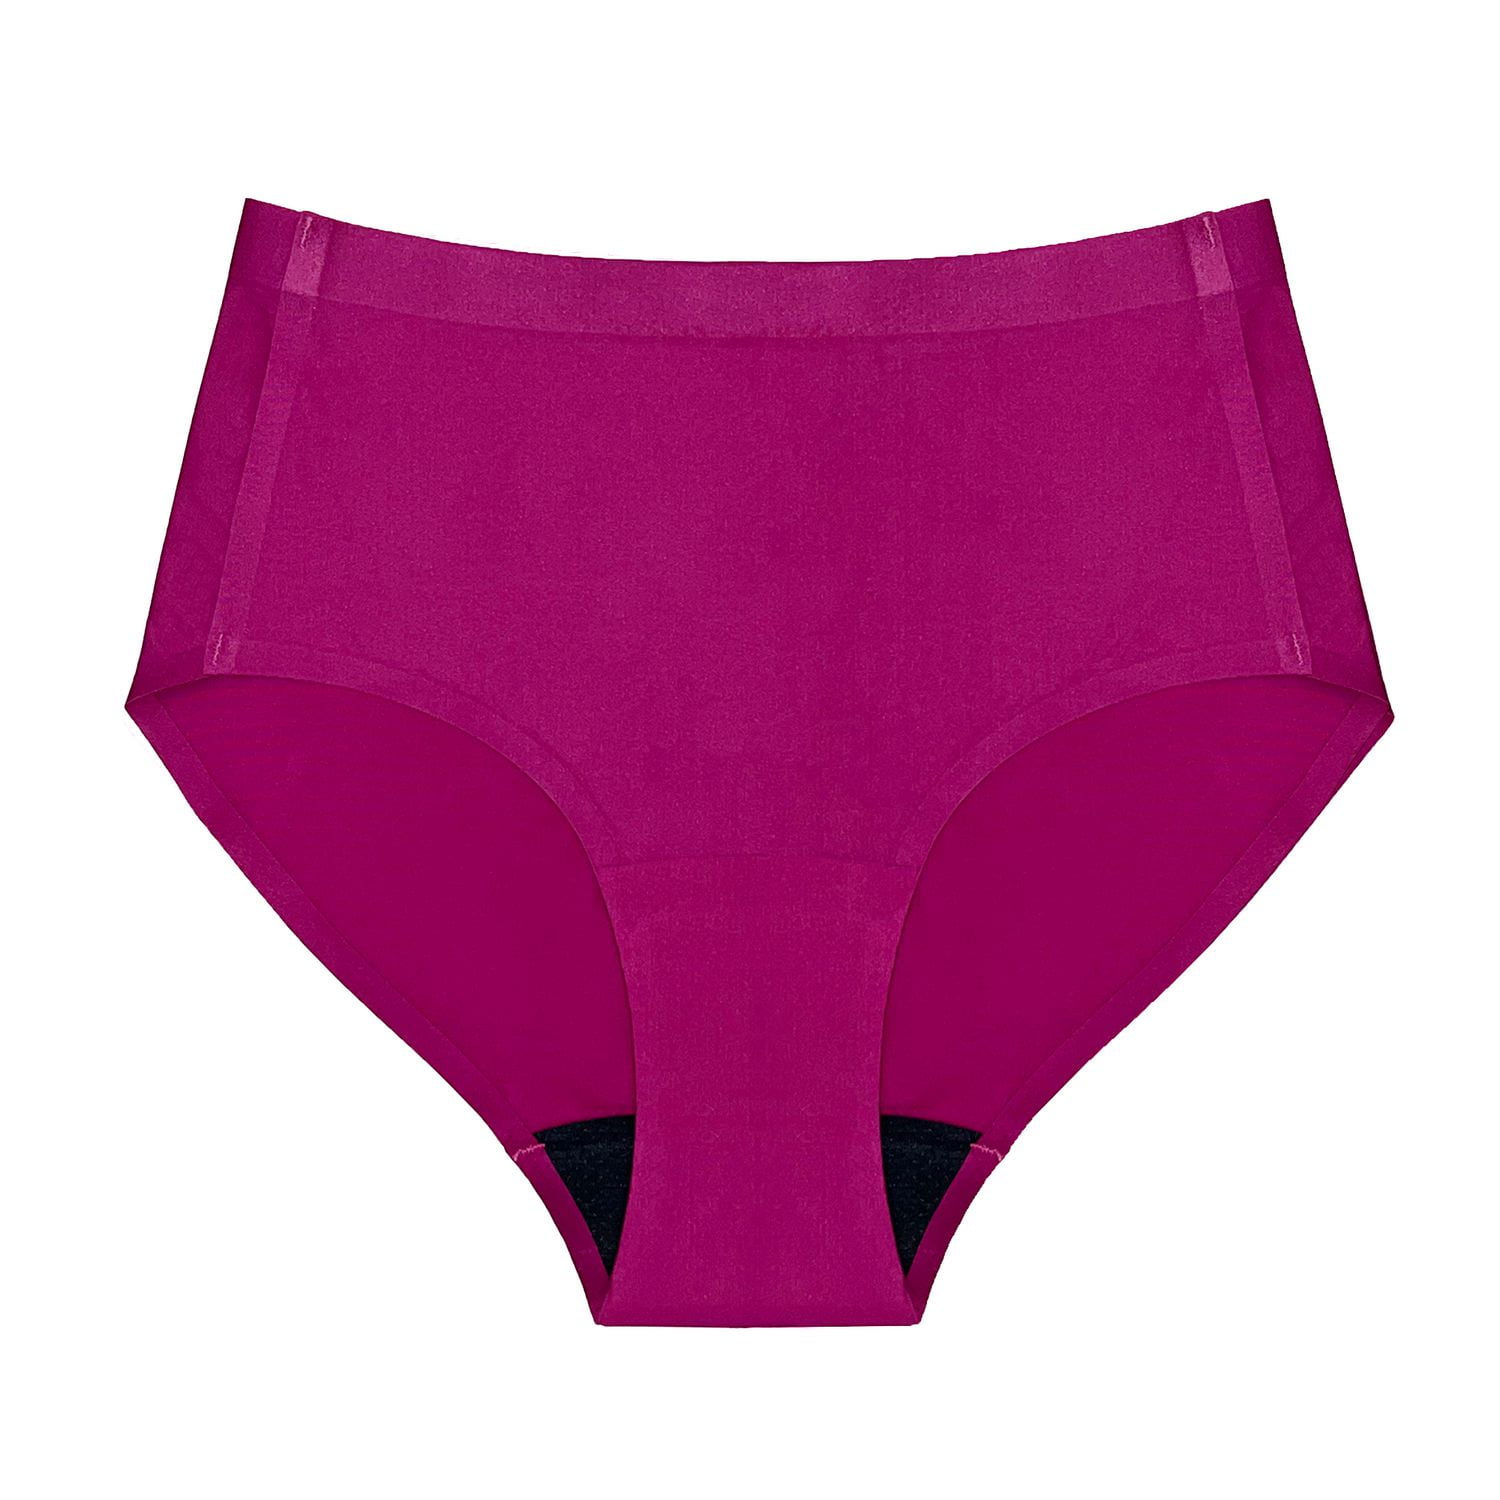 A pair of underwear and underwear pads on a pink surface photo